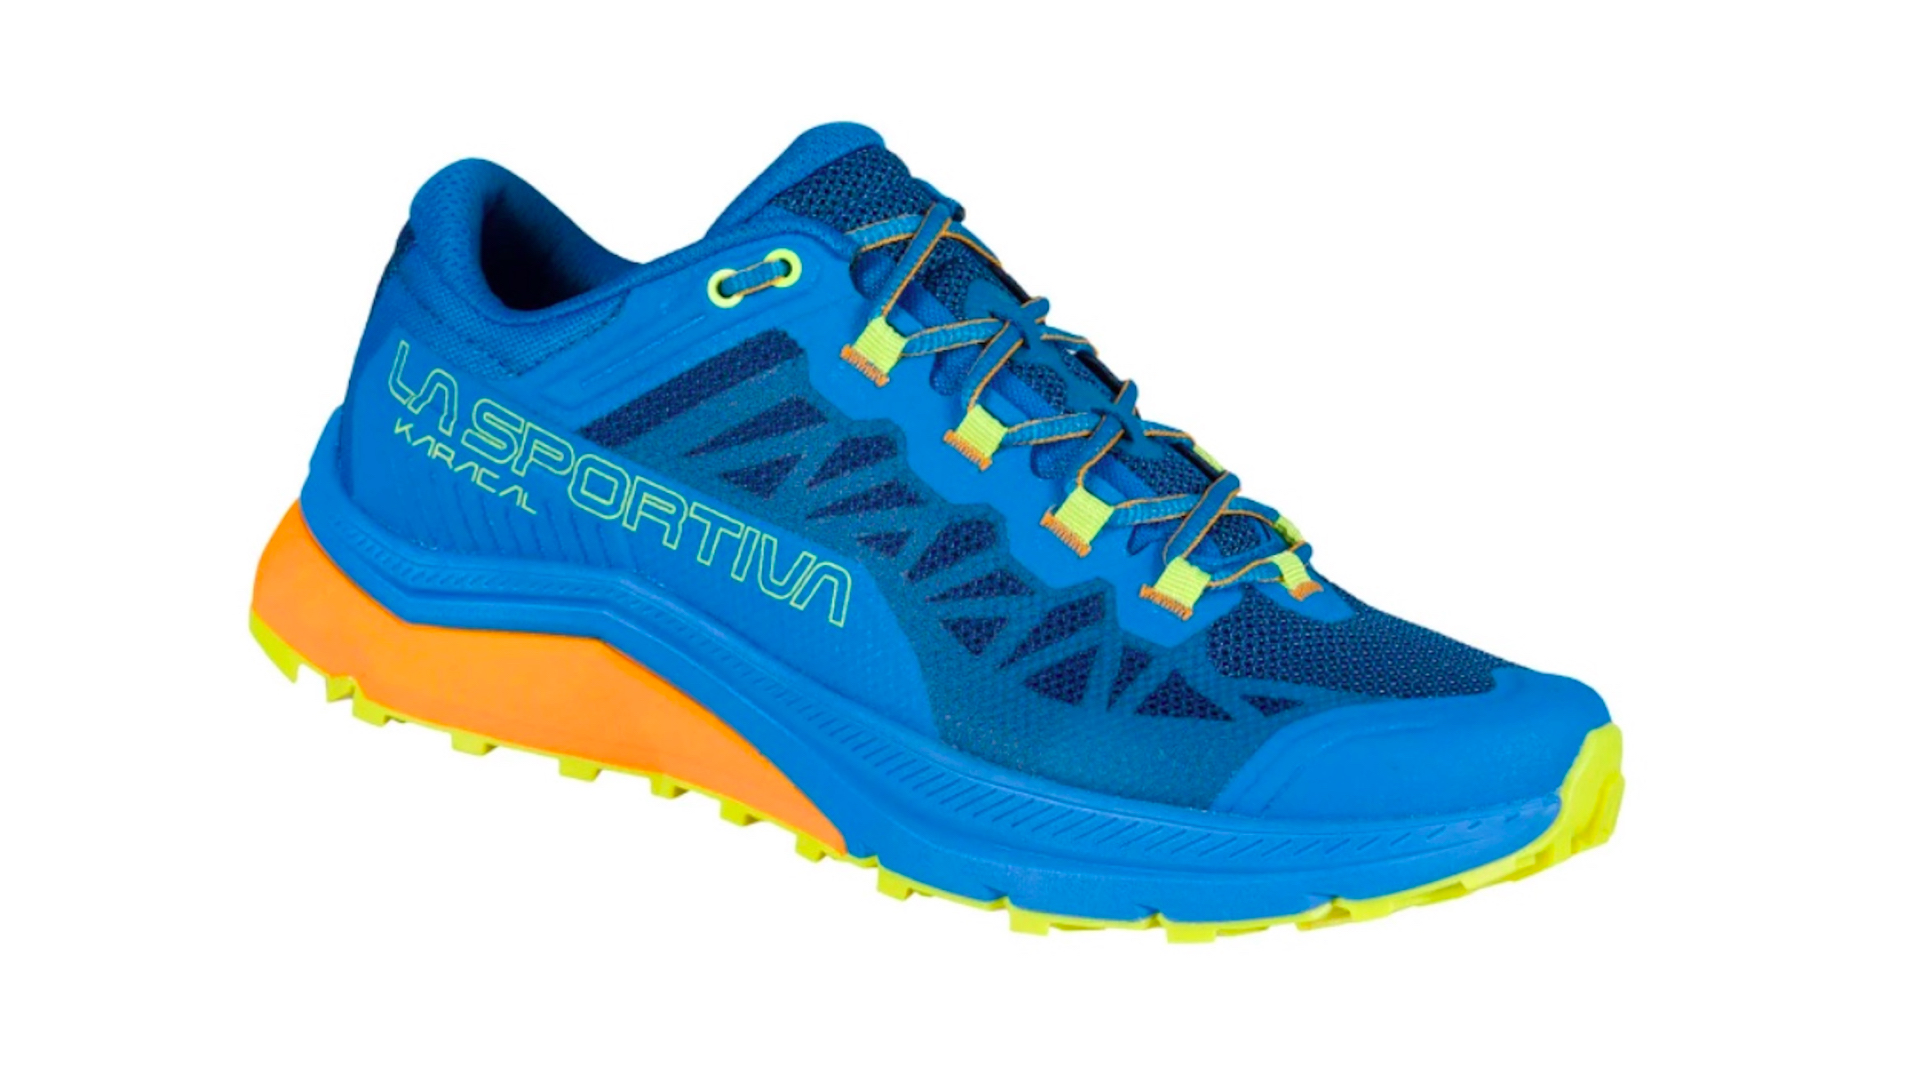 La Sportiva Karacal road to trail running shoes review | Advnture